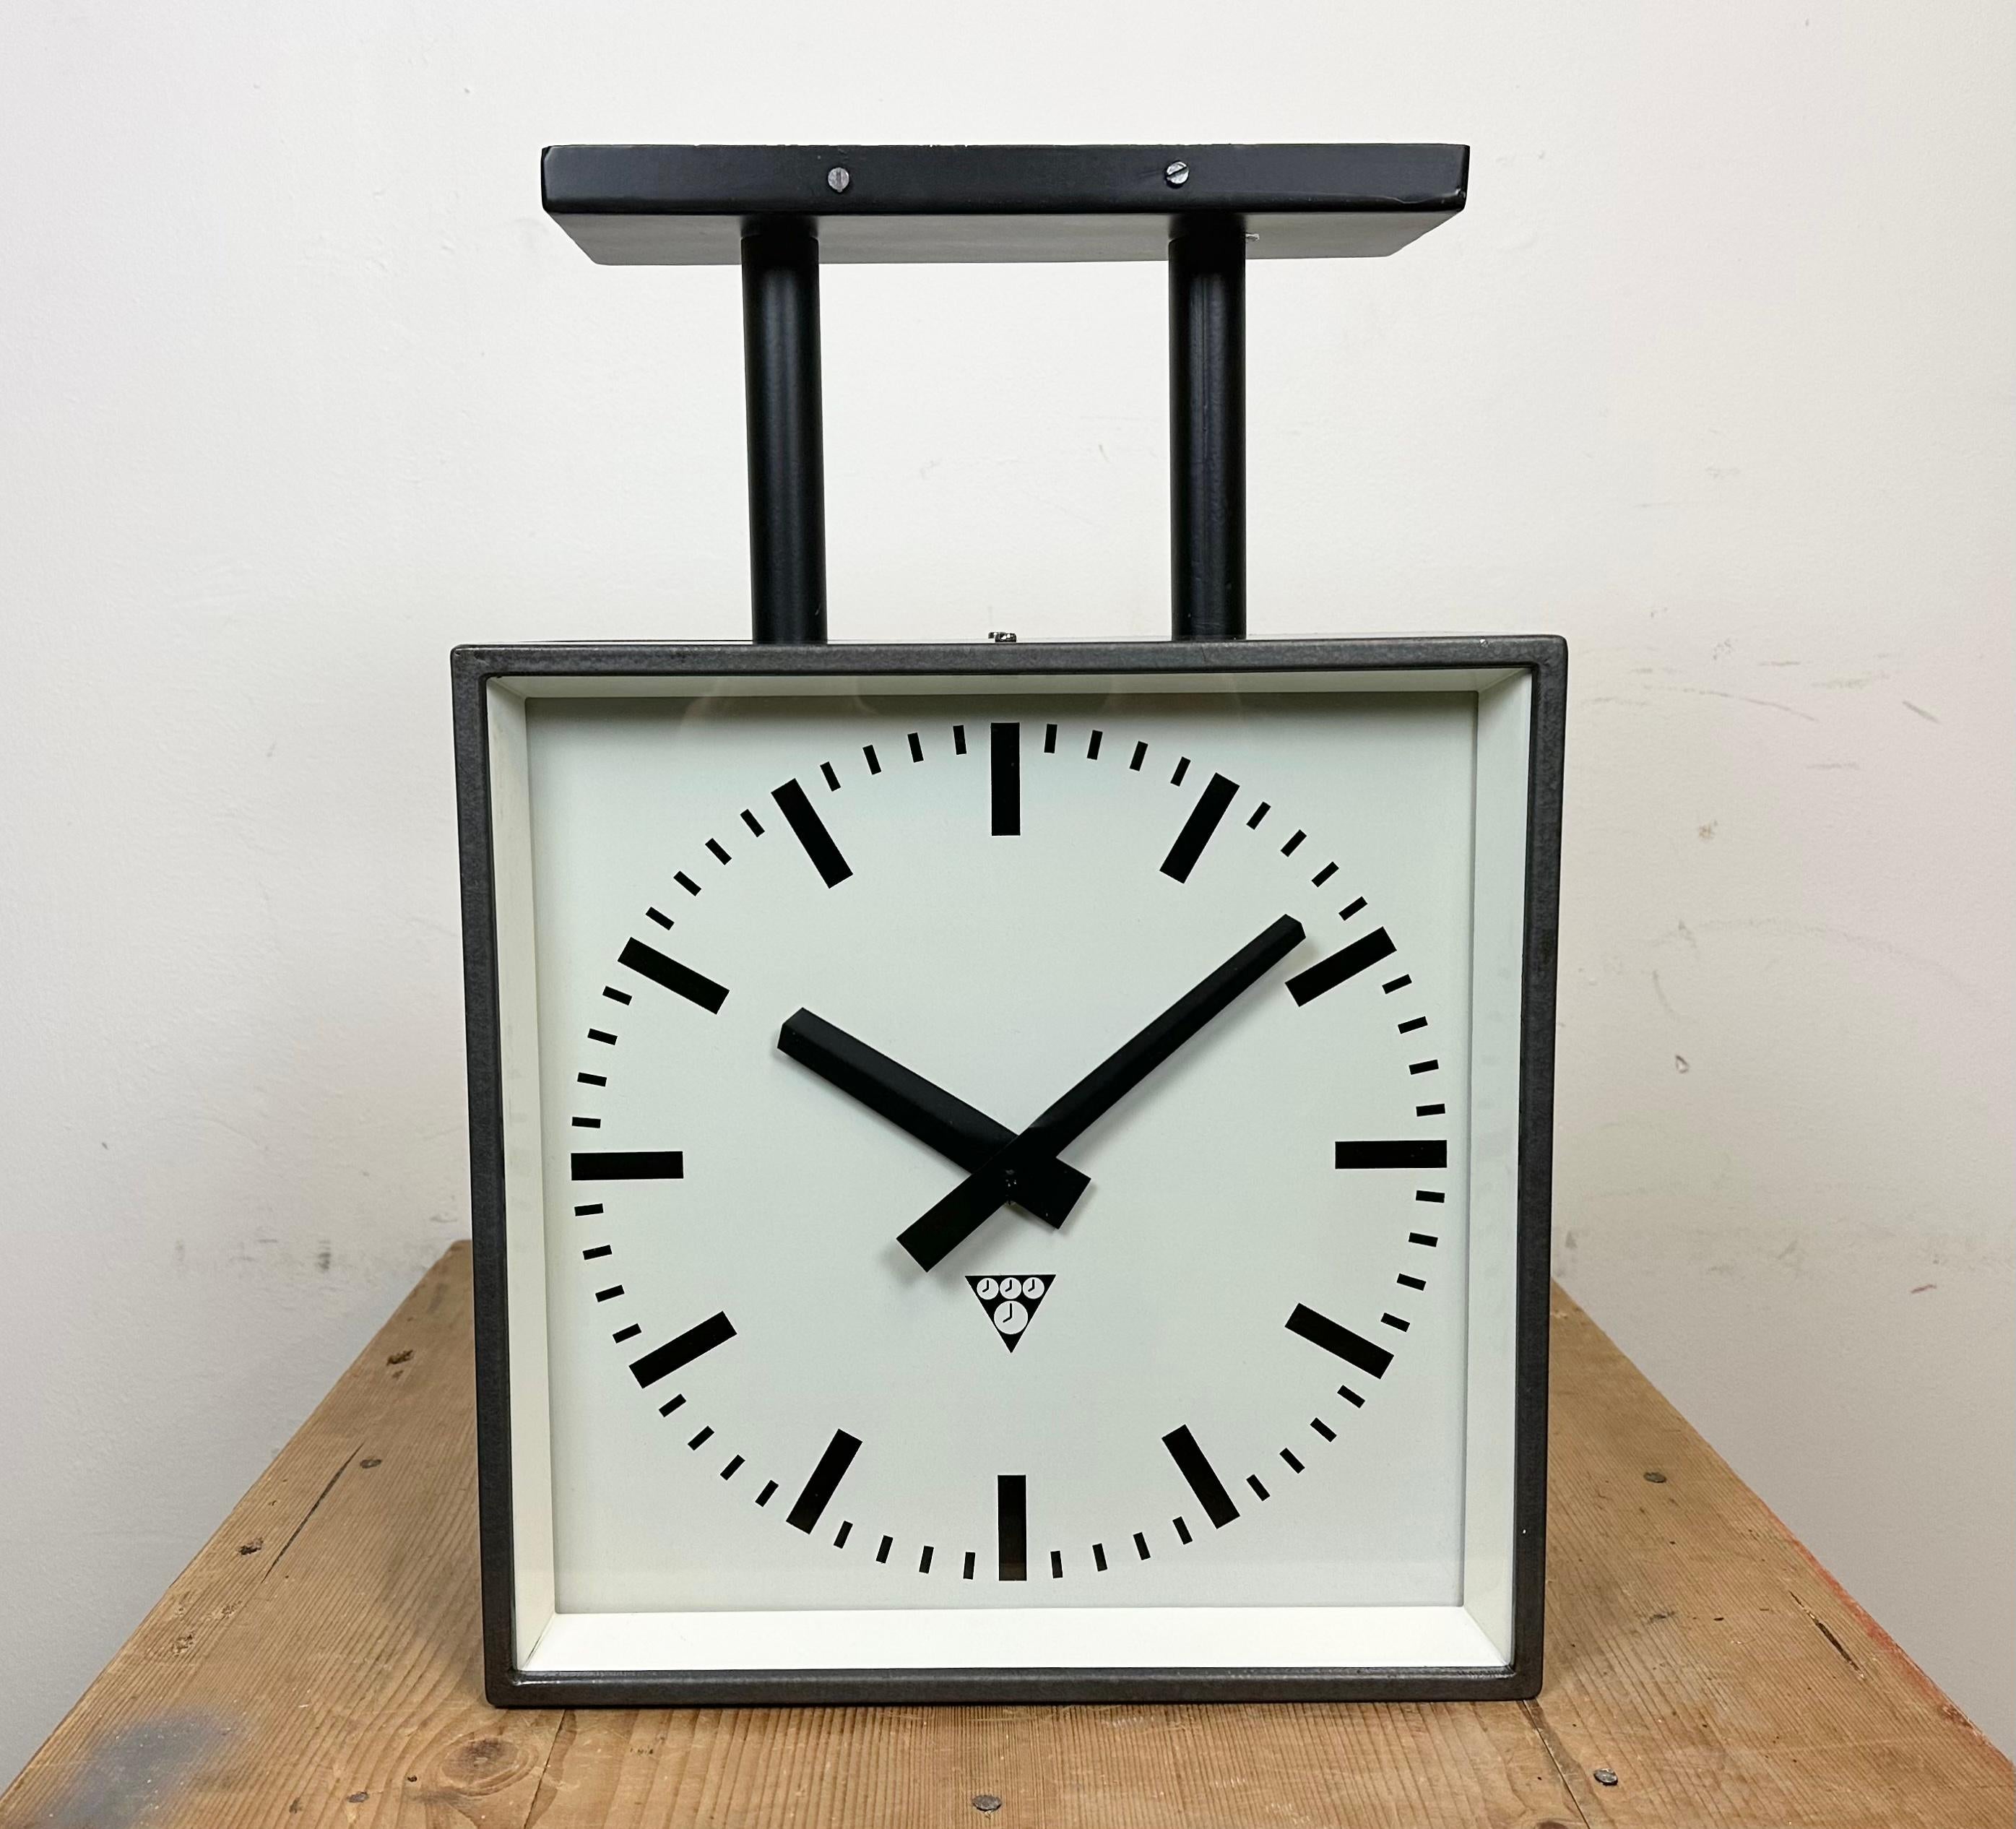 This square double-sided railway, school or factory ceiling clock was produced by Pragotron, in former Czechoslovakia, during the 1970s. The piece features a black metal body, a dark grey hammerpaint clock frames, a clear glass covers and an